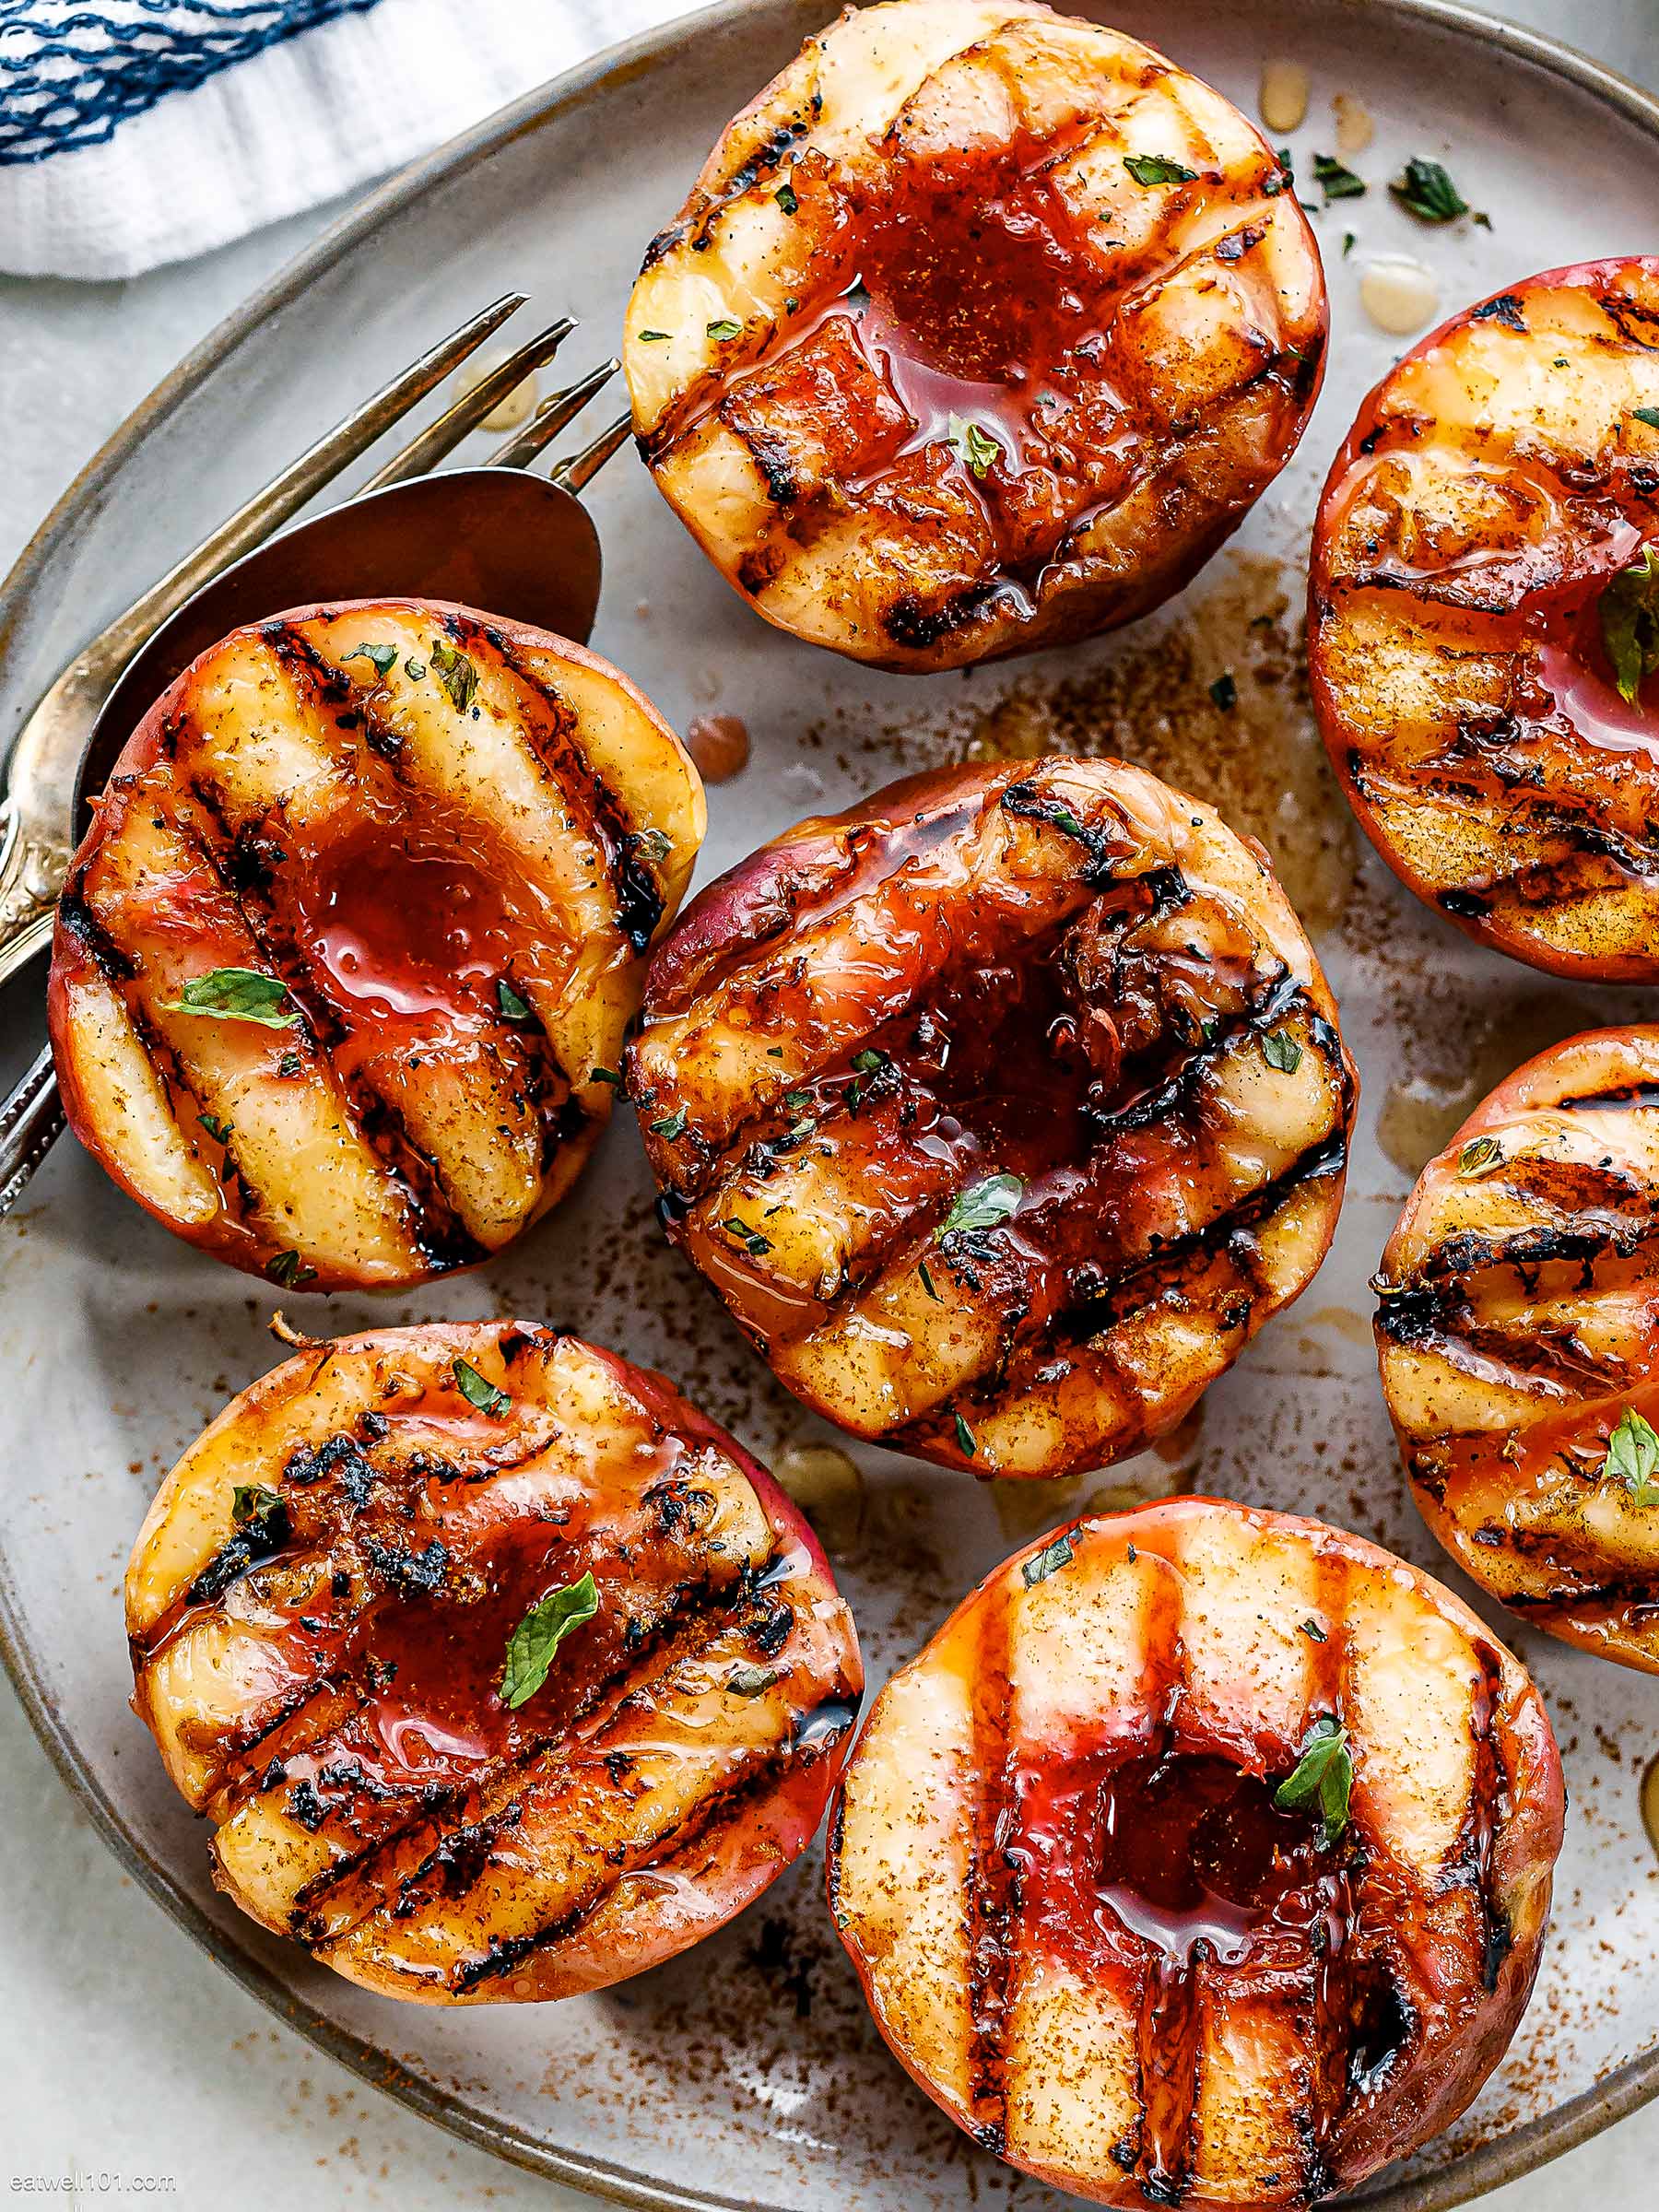 https://www.eatwell101.com/wp-content/uploads/2022/07/how-long-to-grill-peaches.jpg